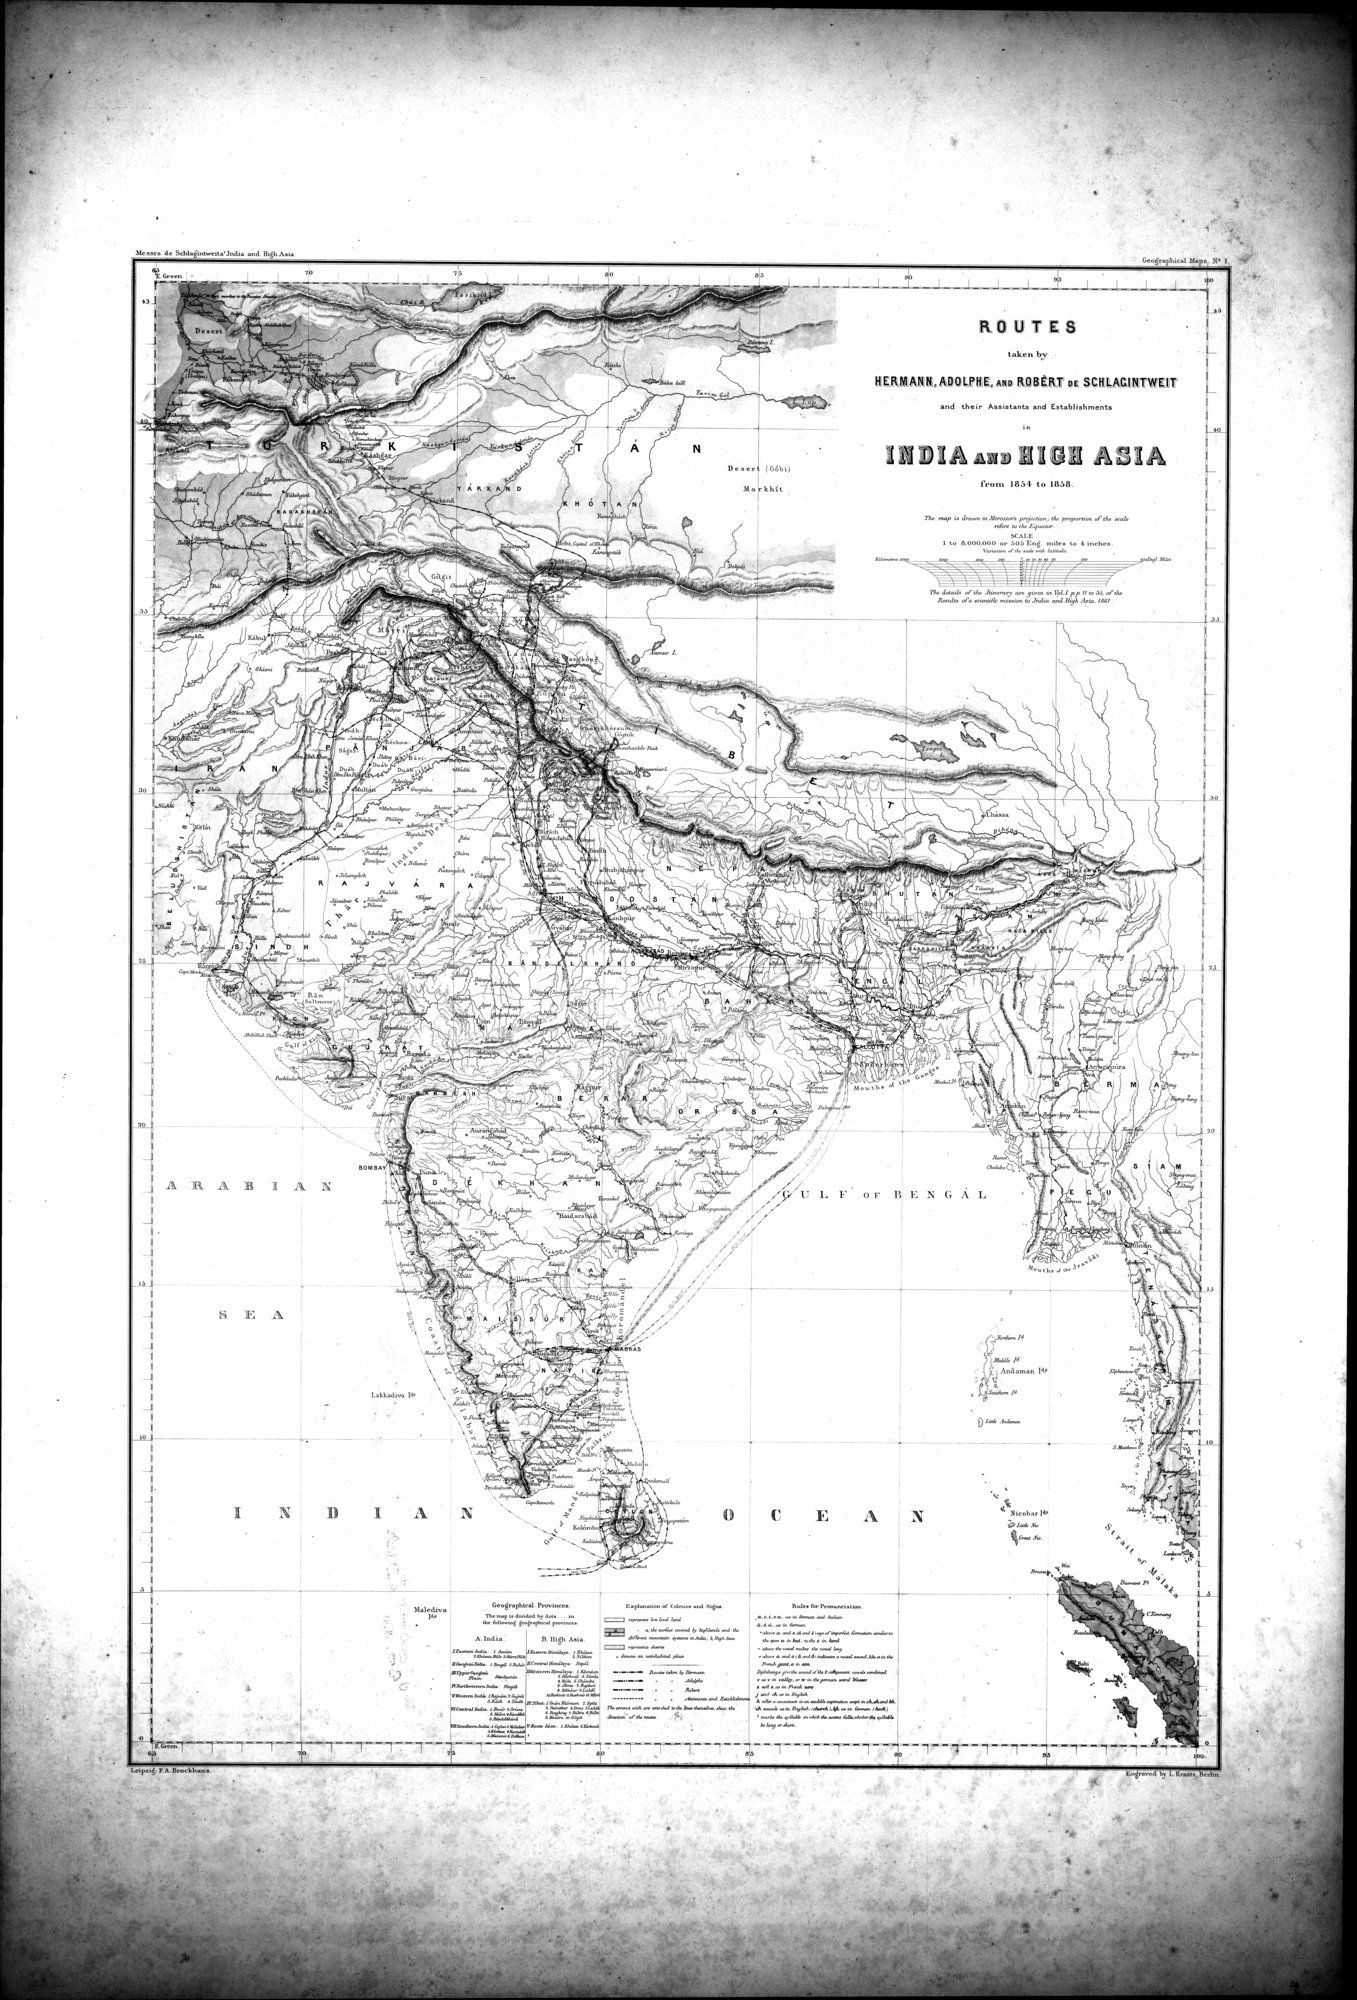 Results of a Scientific Mission to India and High Asia : vol.5 / Page 18 (Grayscale High Resolution Image)